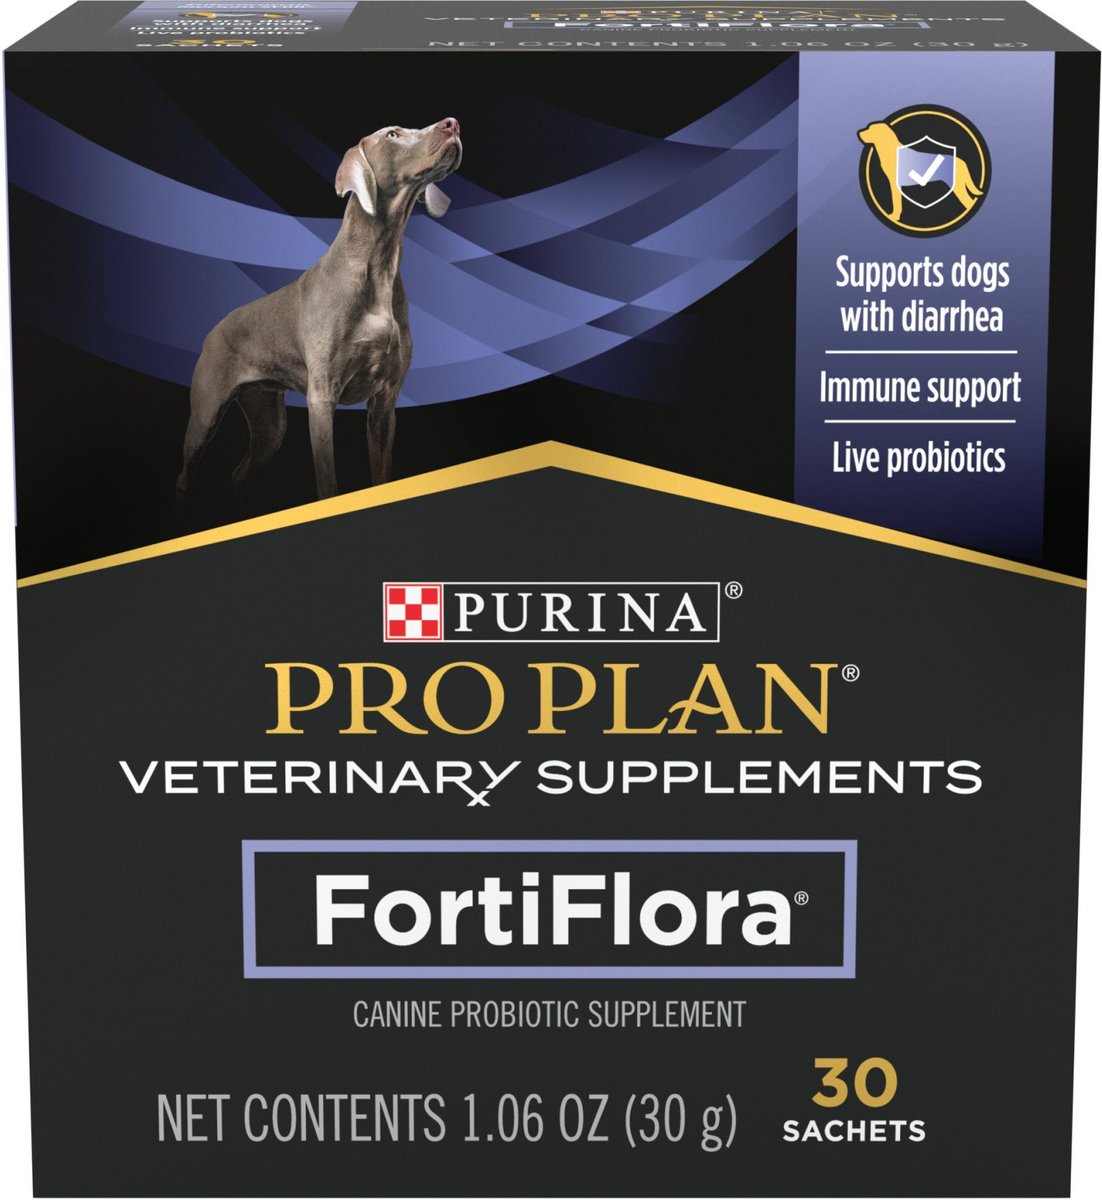 Purina Pro Plan Veterinary Diets FortiFlora Powder Digestive Supplement for Dogs